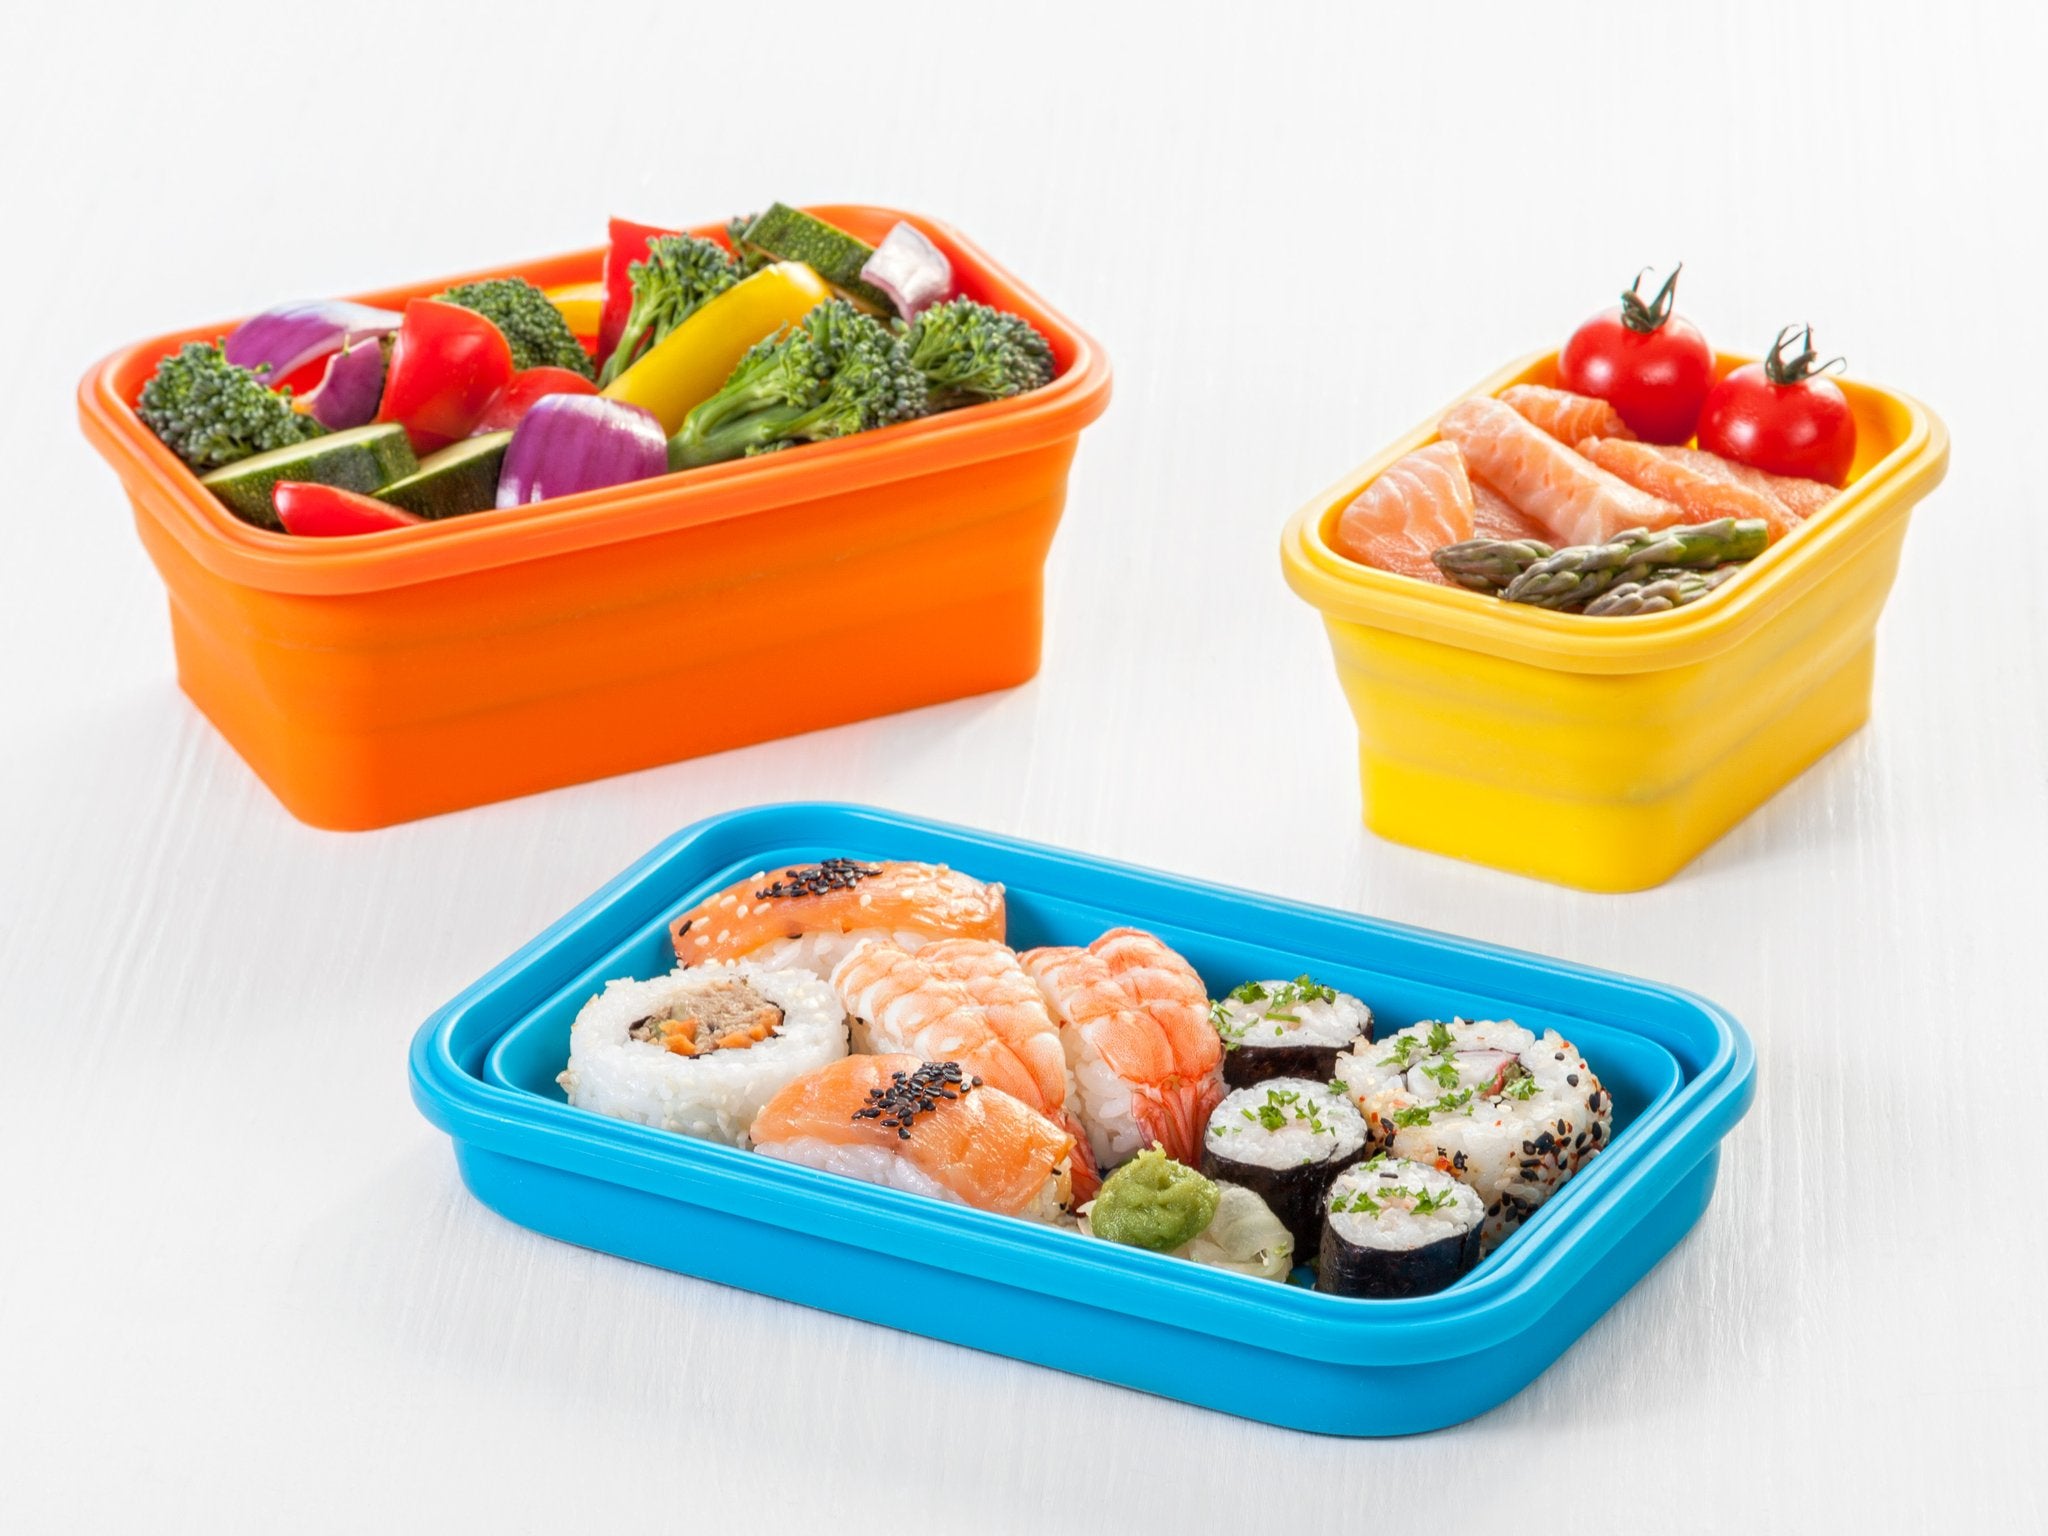  BLYANX Set of 4 Collapsible Silicone Food Storage Containers  with Lids, Flat Stacks, Stackable Reusable Lunch Meal Prep Containers, RV  Travel Accessories, Microwave Freezer Dishwasher Safe,Multi-Color: Home &  Kitchen